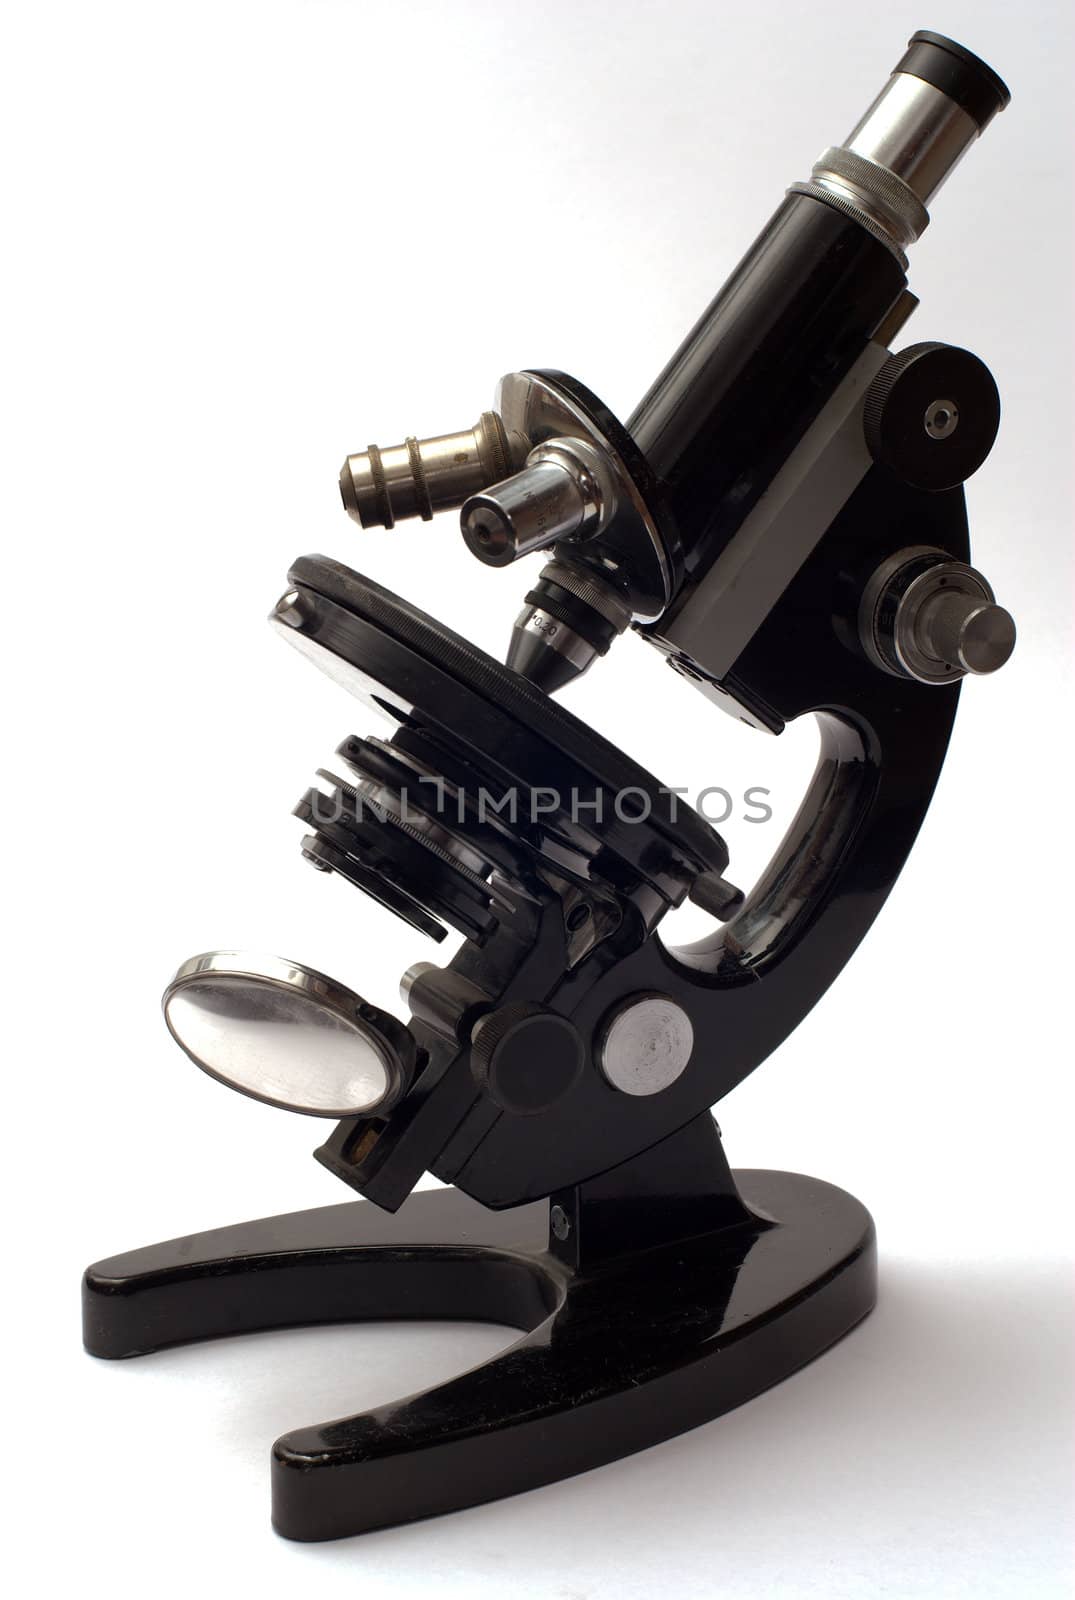 old microscope  by vikinded